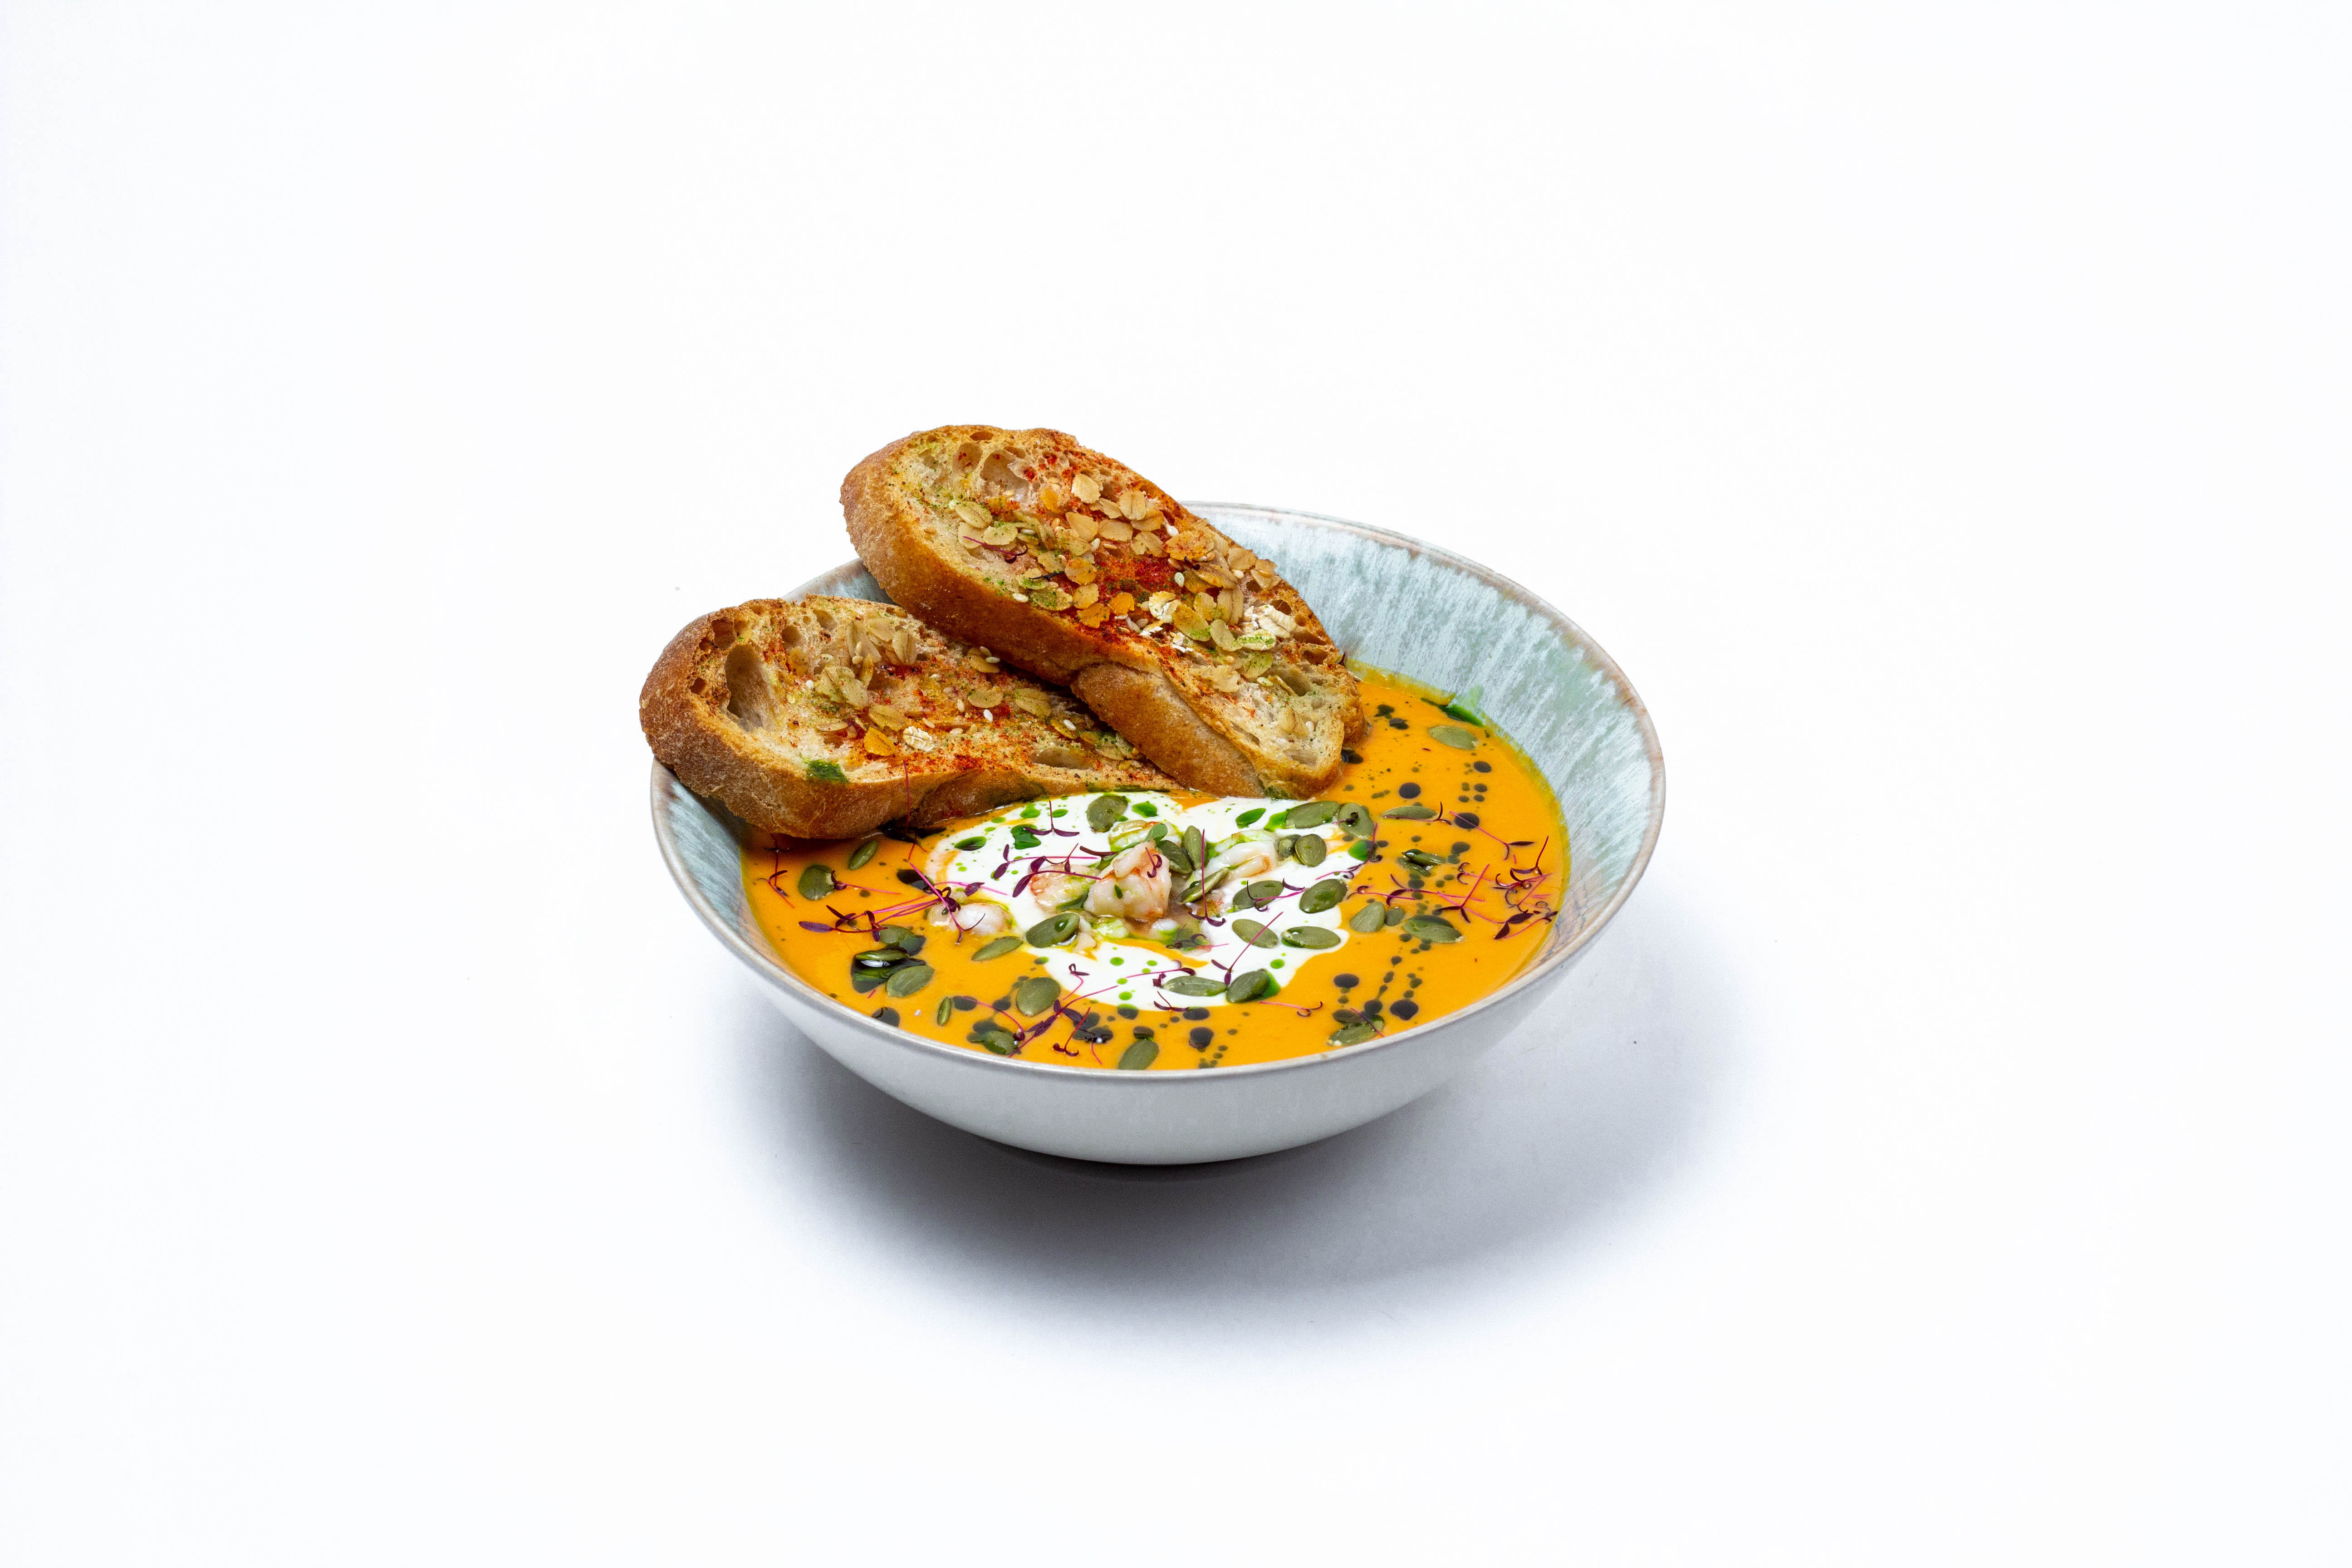 Pumpkin soup with tiger prawns in fragrant herbs, Stracciatella cheese, ciabatta croutons and pumpkin seeds